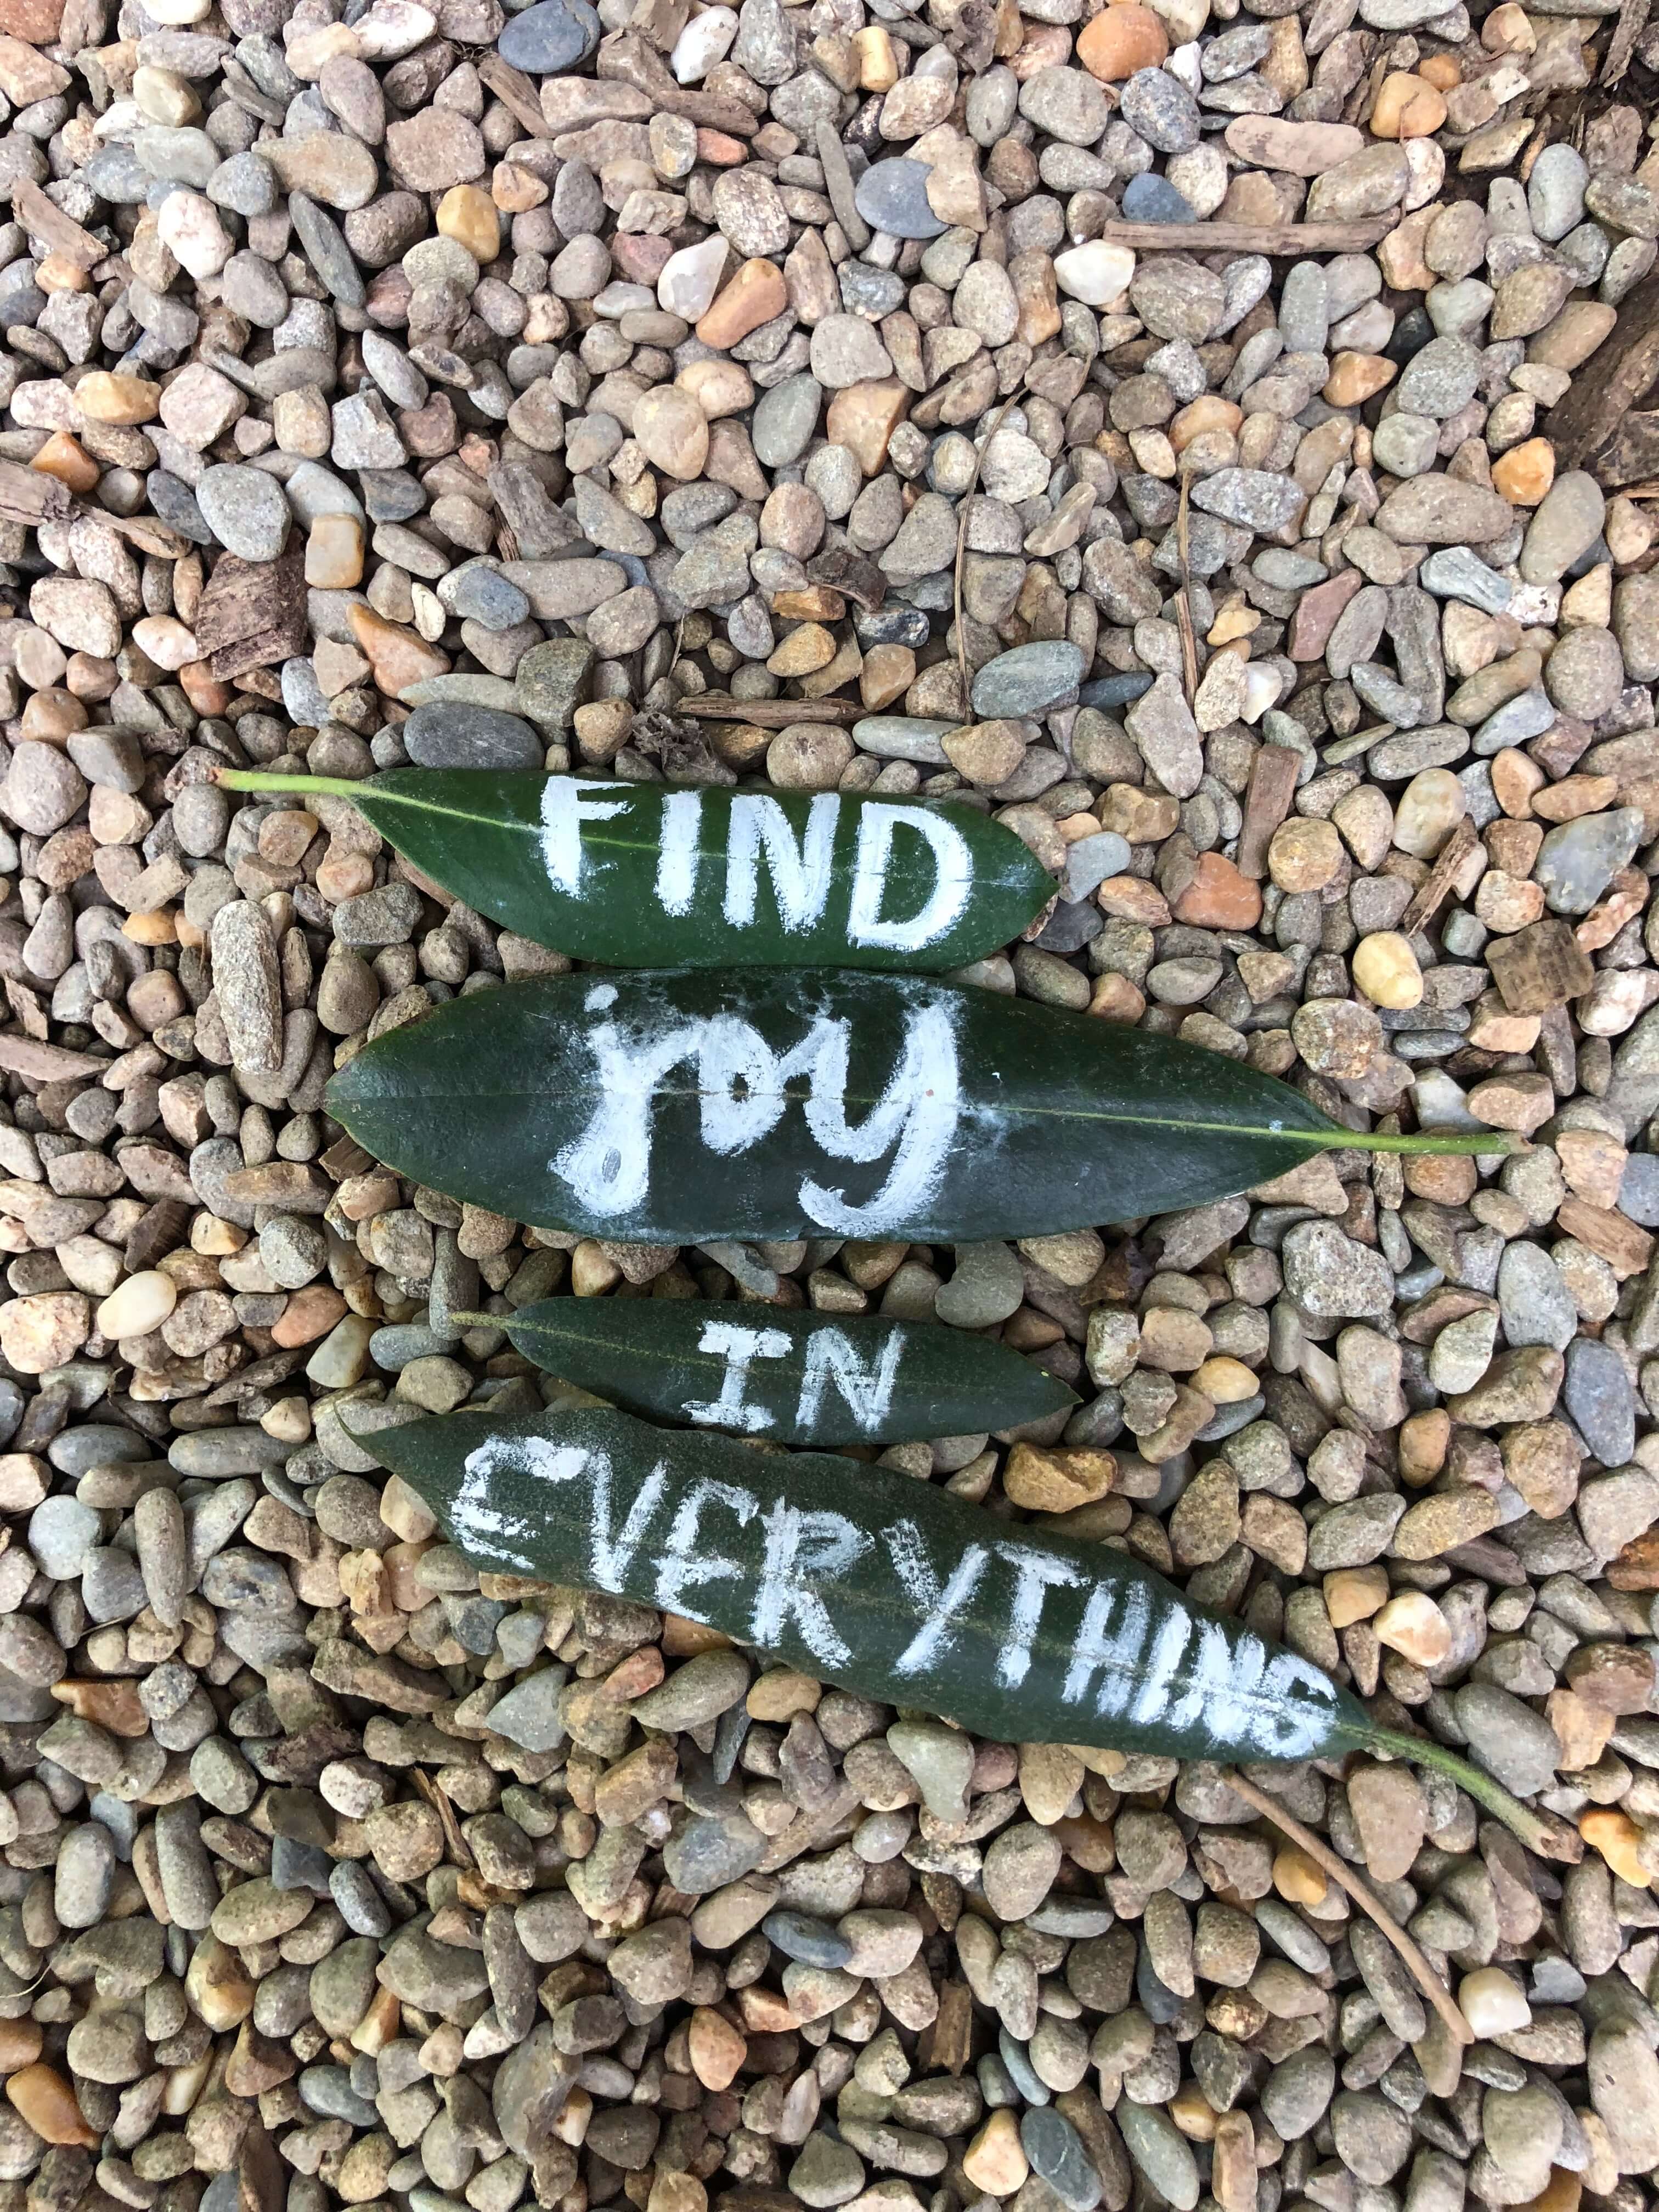 Large stones saying find joy in everything on smaller pebbles